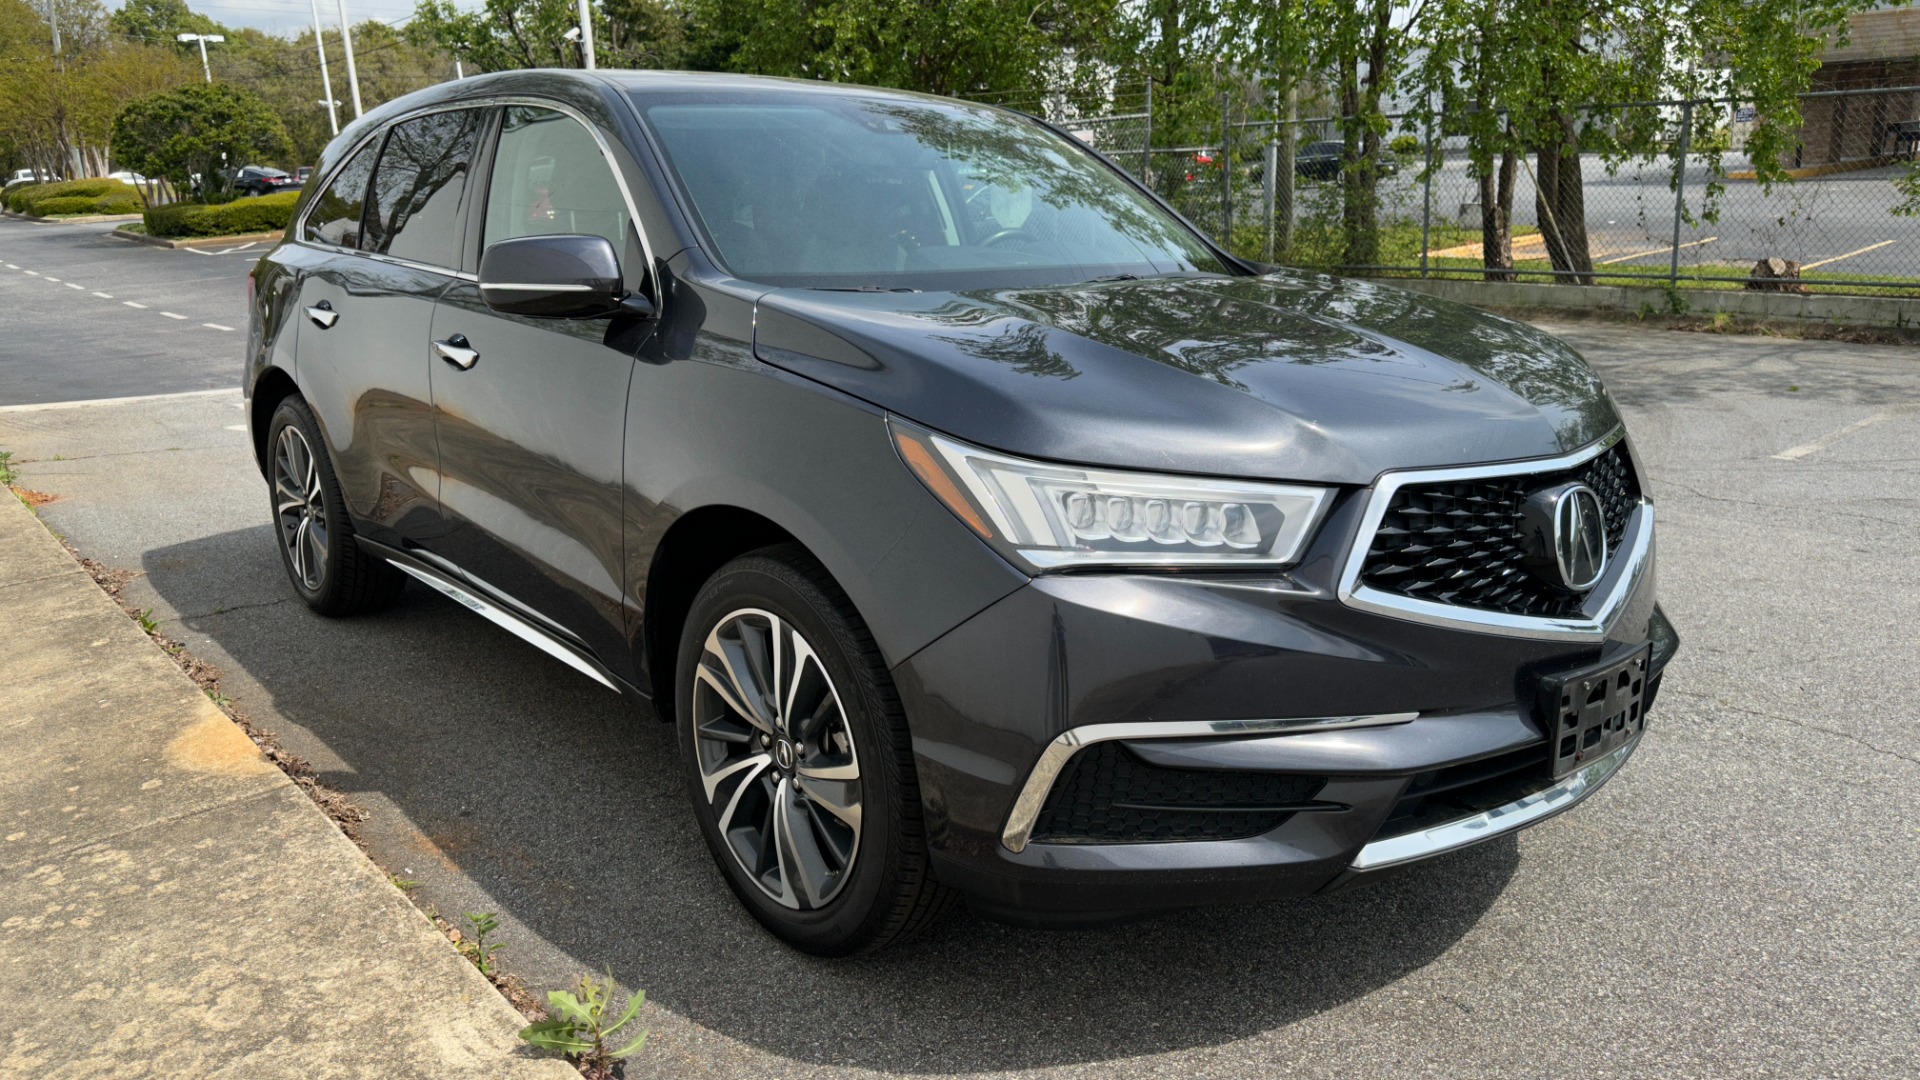 Used 2020 Acura MDX TECHNOLOGY PACKAGE / NAV / BACKUP CAM / SAFETY ASSIST / 3RD ROW / SUNROOF for sale $36,495 at Formula Imports in Charlotte NC 28227 5